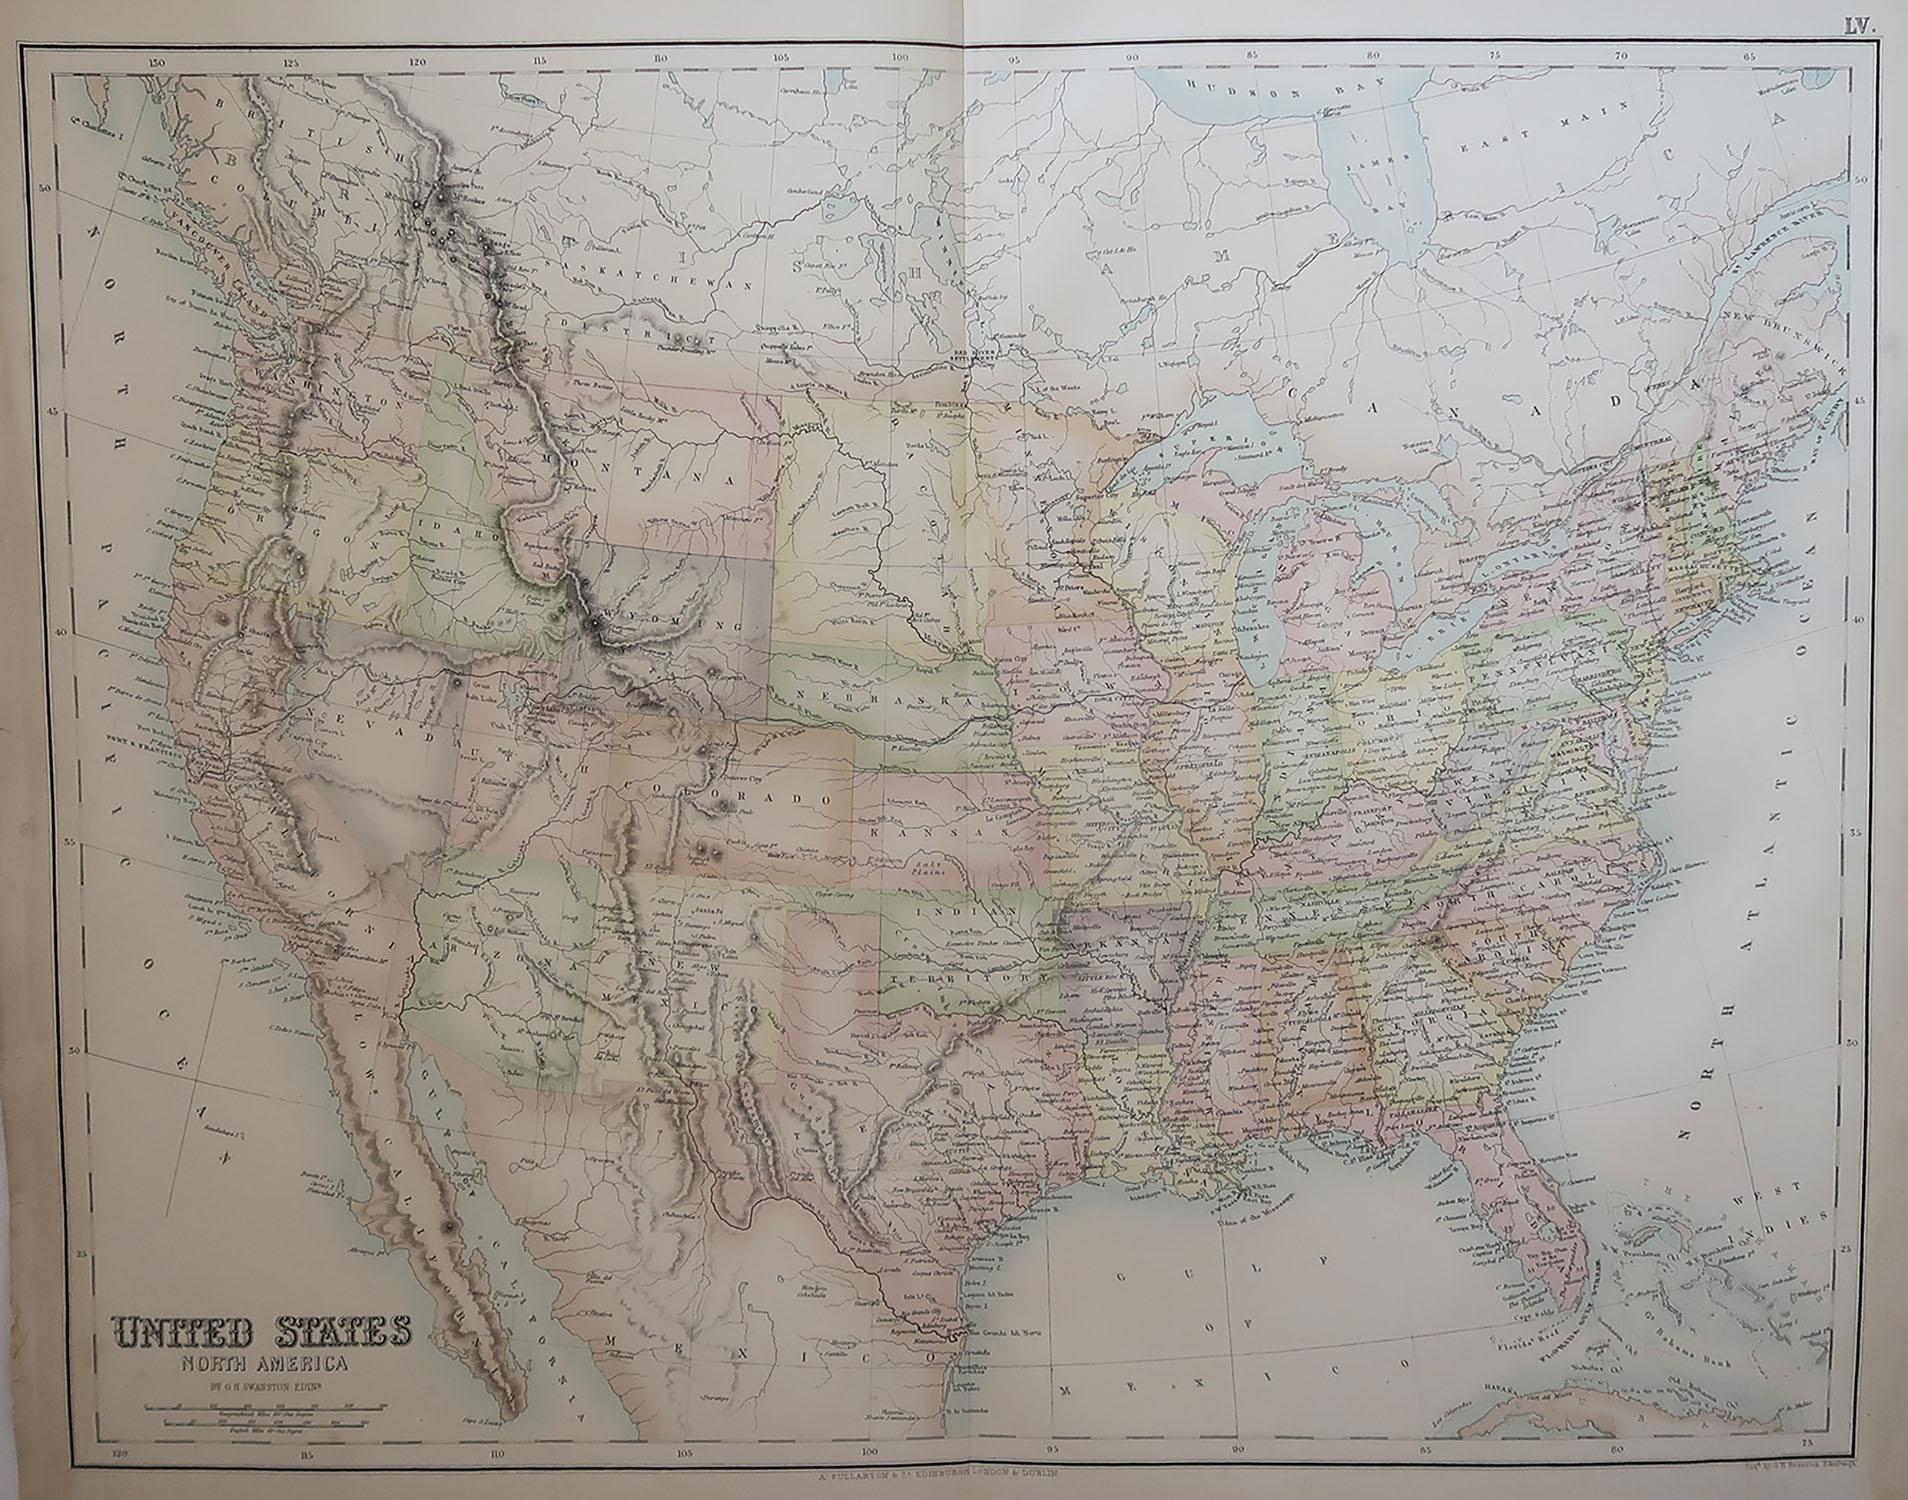 Great map of The United States

From the celebrated Royal Illustrated Atlas

Lithograph by Swanston. Original color. 

Published by Fullarton, Edinburgh, C.1870

Repairs to minor edge tears

Unframed.












